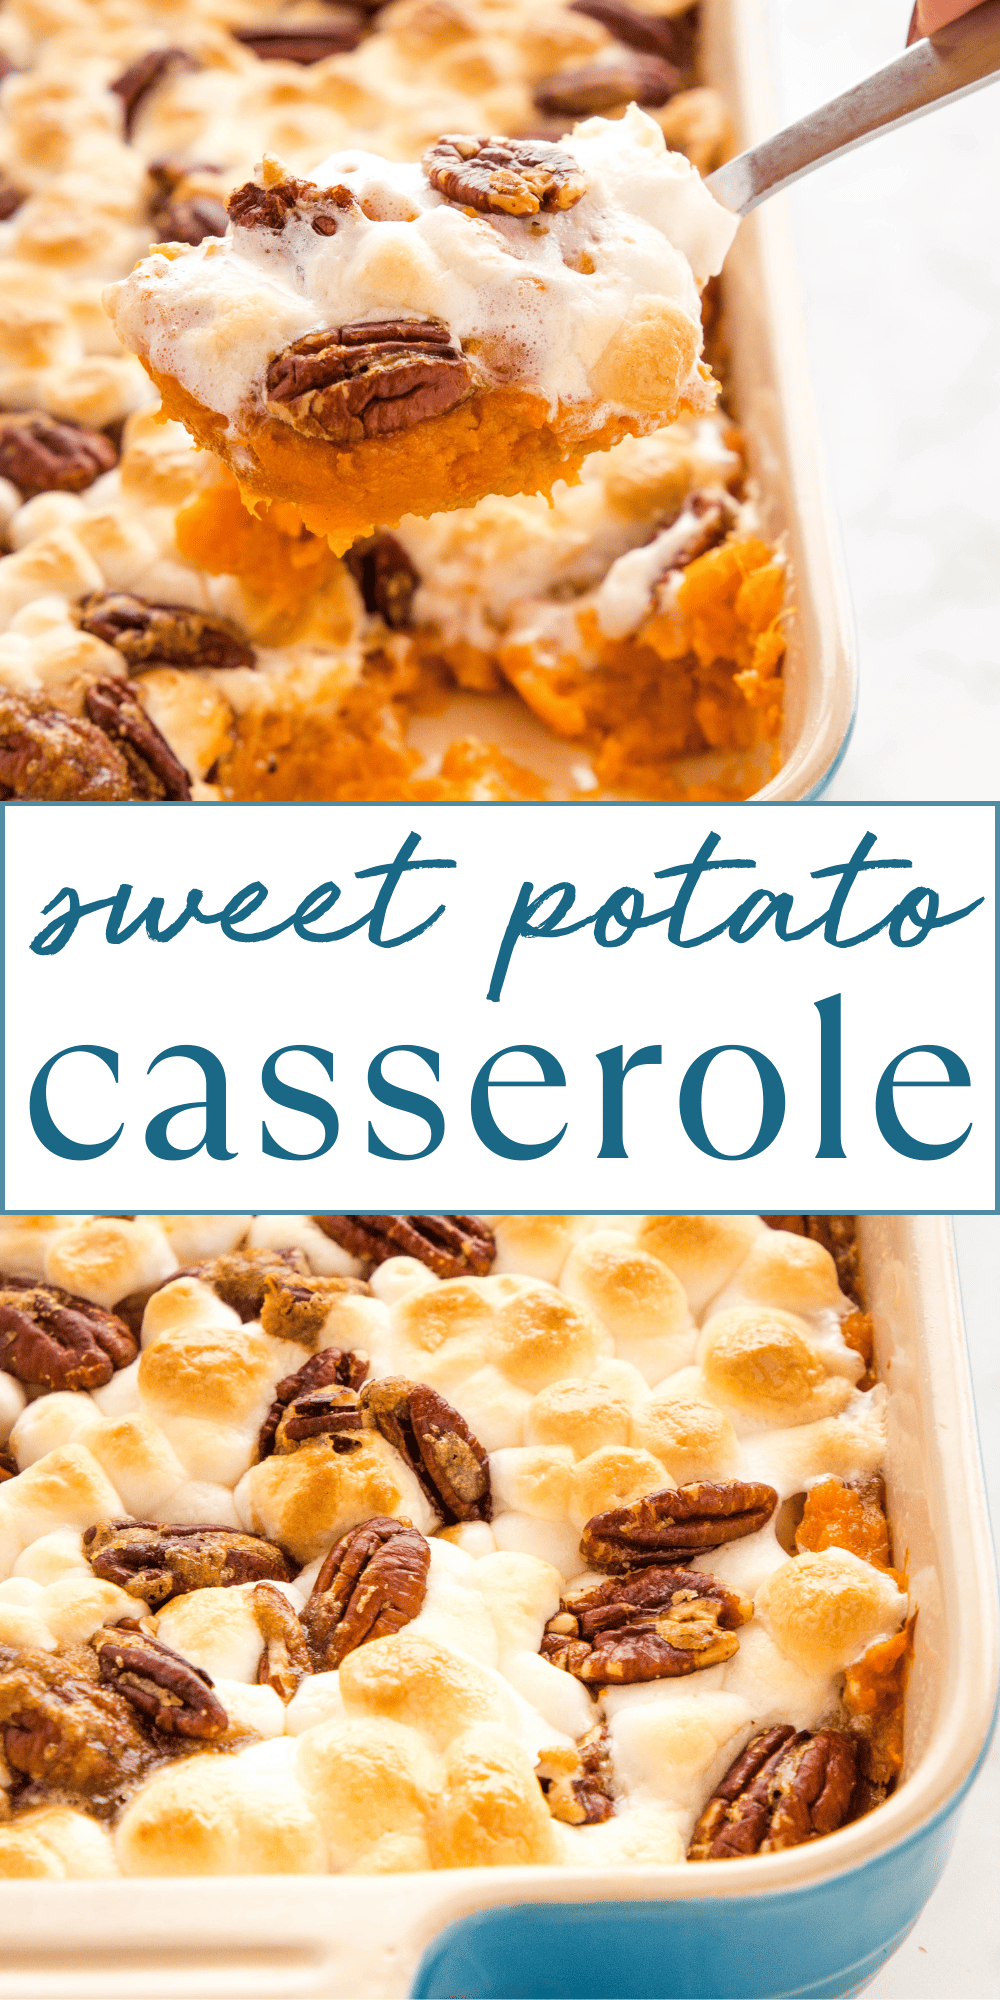 This Sweet Potato Casserole recipe with marshmallows is a classic holiday side dish made with mashed sweet potatoes topped with sweet marshmallows and candied pecans! An old fashioned family favourite recipe that's easy to make ahead! Recipe from thebusybaker.ca! #sweetpotatocasserole #holidaysidedish #sweetpotatoes #sweetpotatocasserolewithmarshmallows #thanksgiving #christmas #sidedish #easysidedish #classicsidedish #sweetpotatosidedish via @busybakerblog